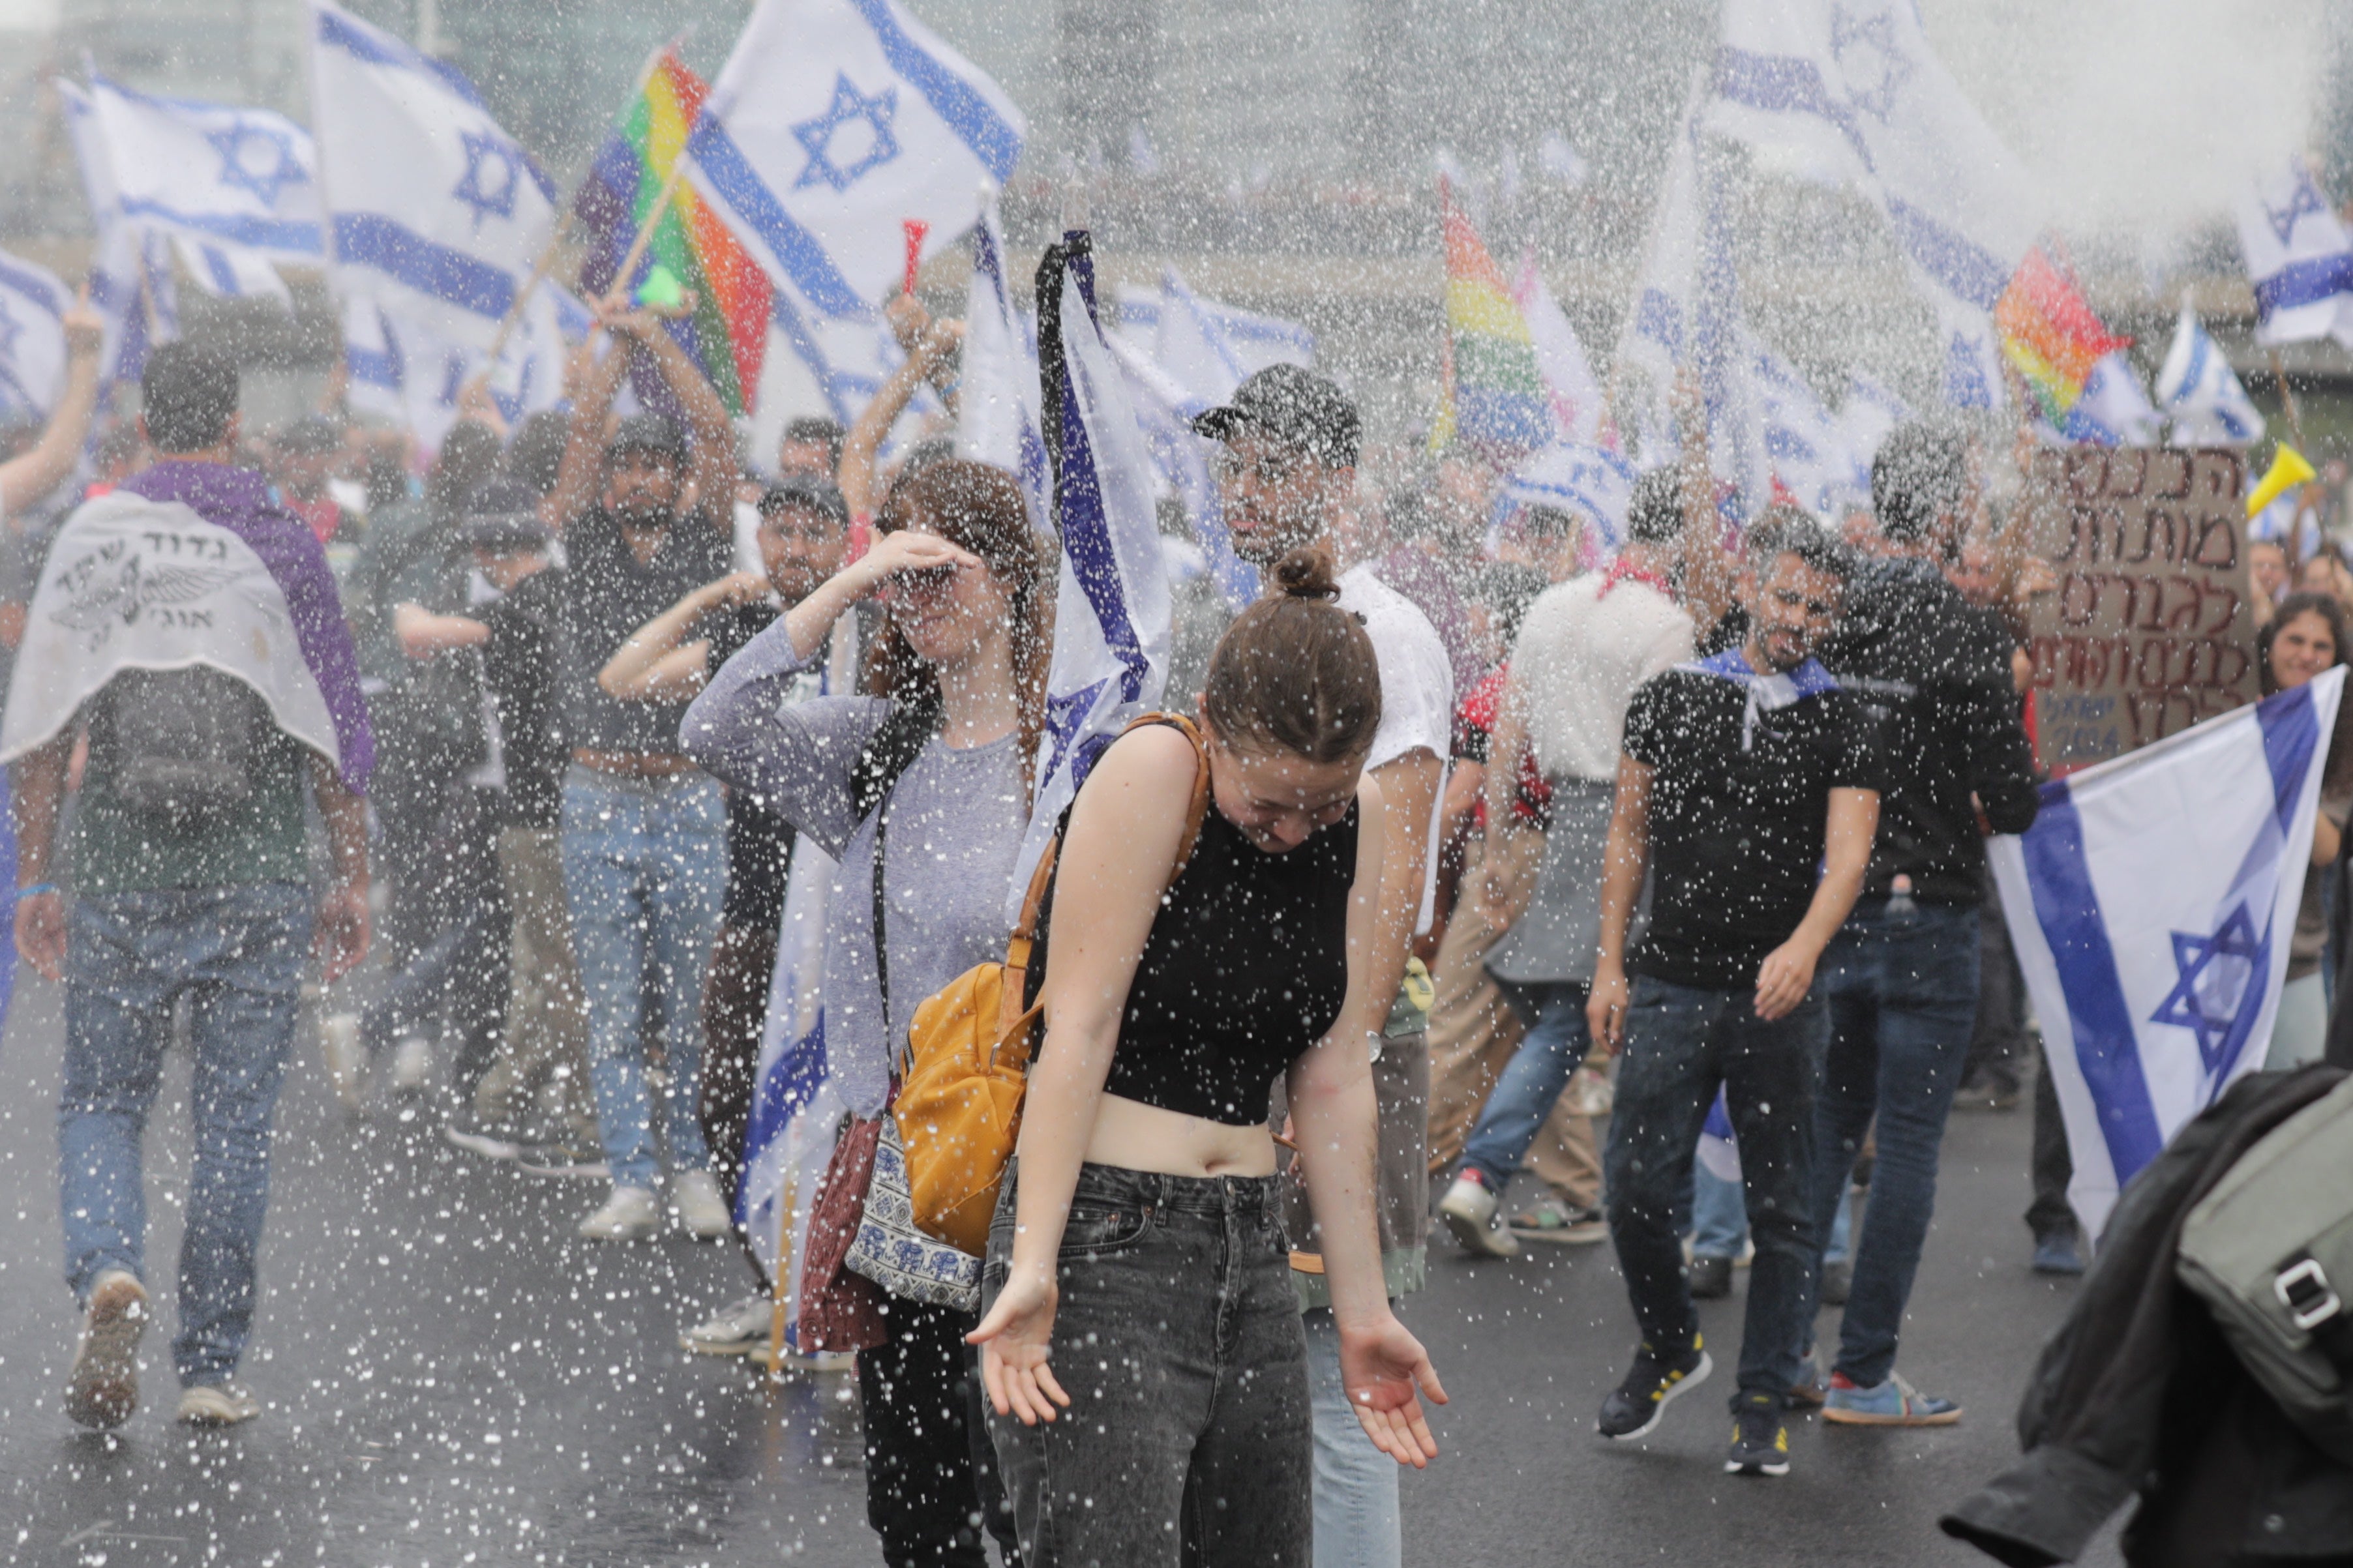 Police use water cannons on protesters blocking the Ayalon Highway in Tel Aviv on Thursday